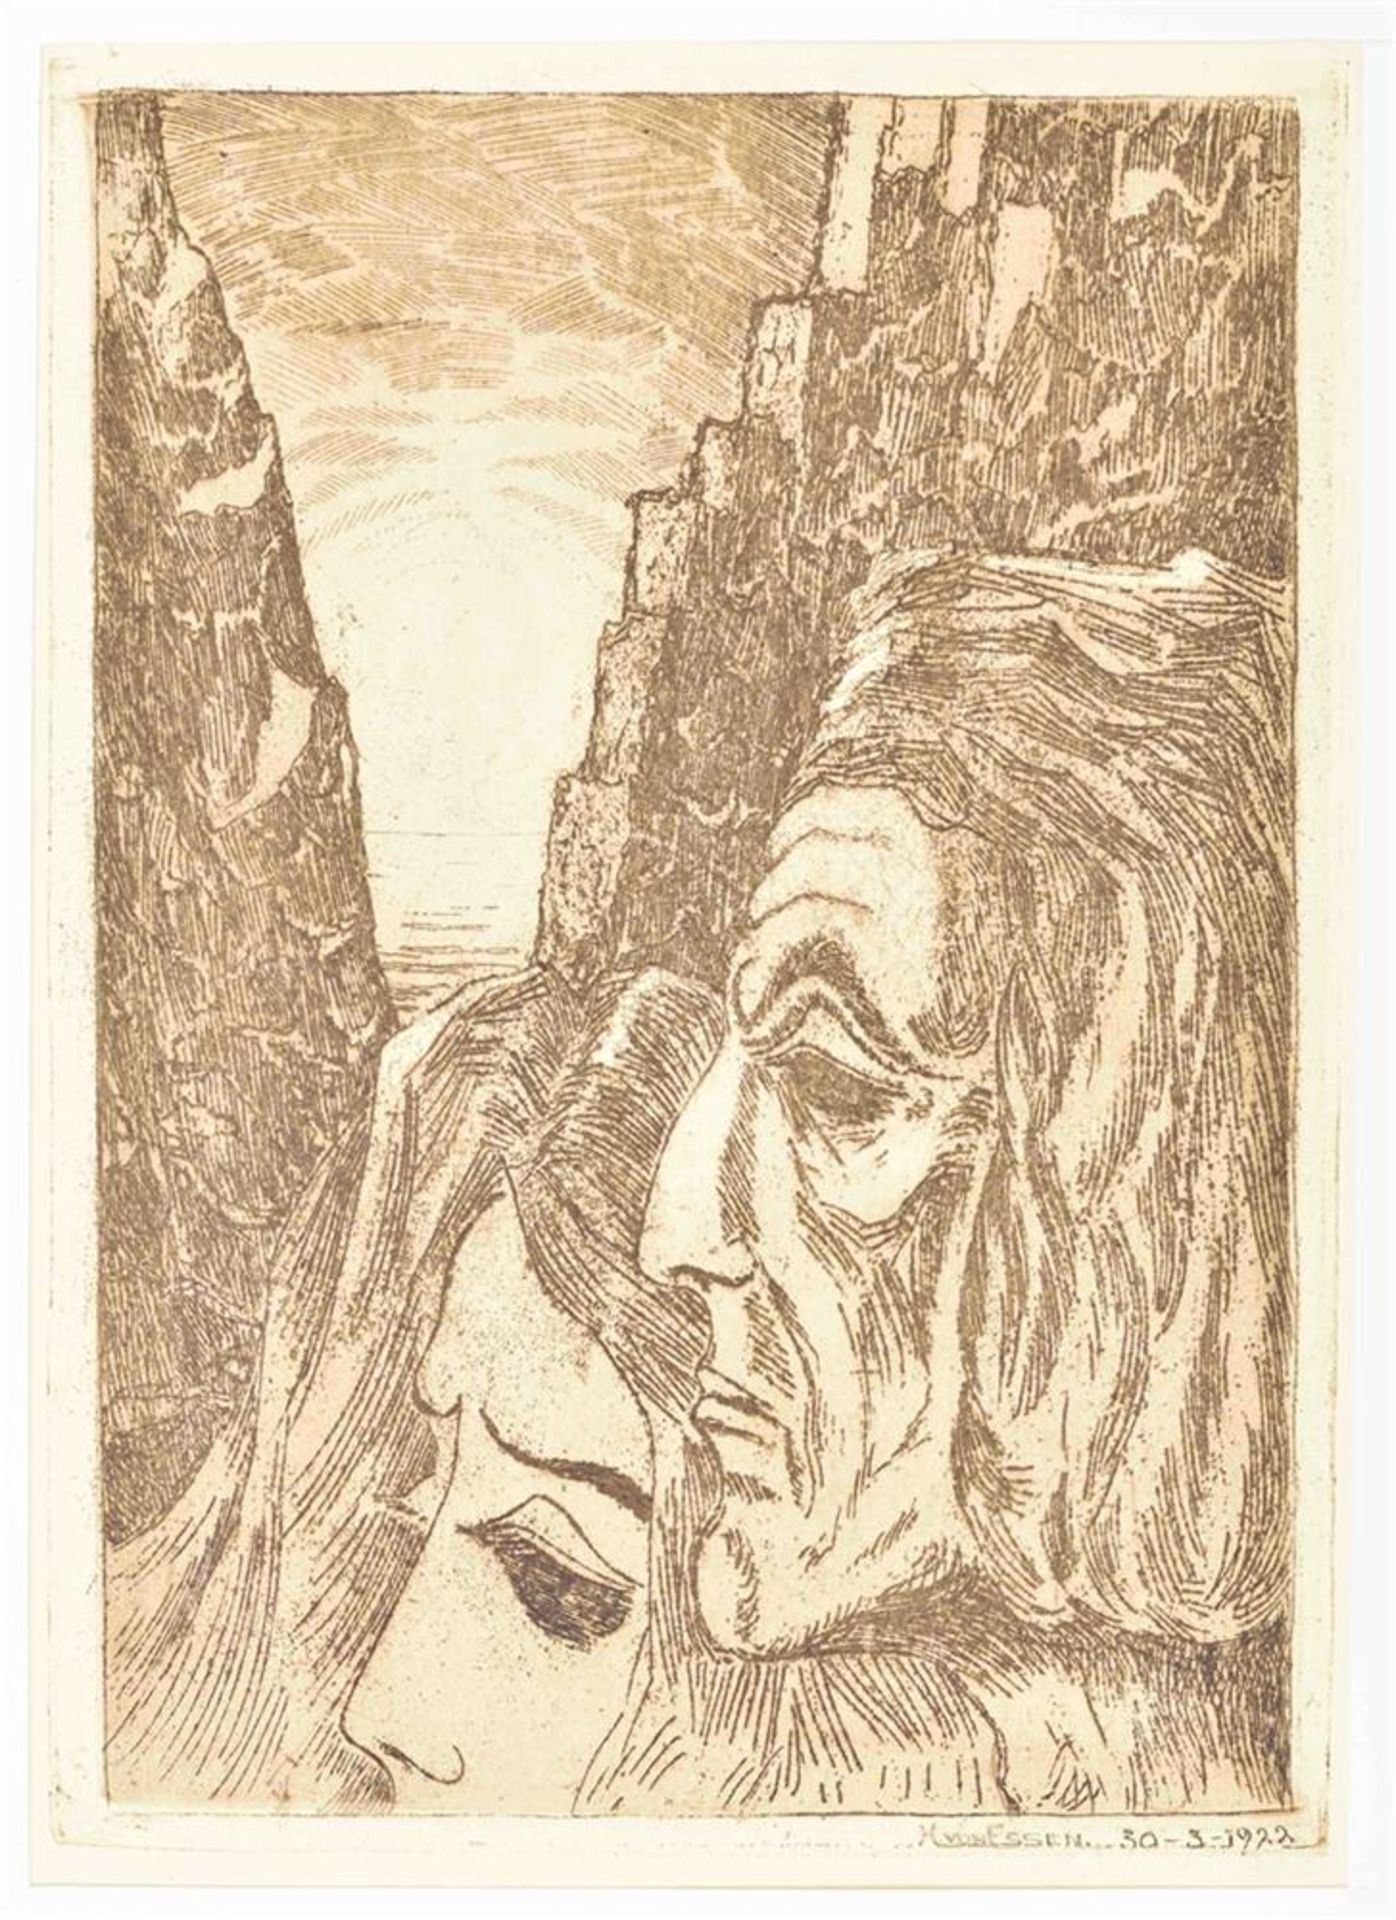 Essen, H. von (1886-1947). Four etchings: (1) 'Crying nude woman' - Image 3 of 6